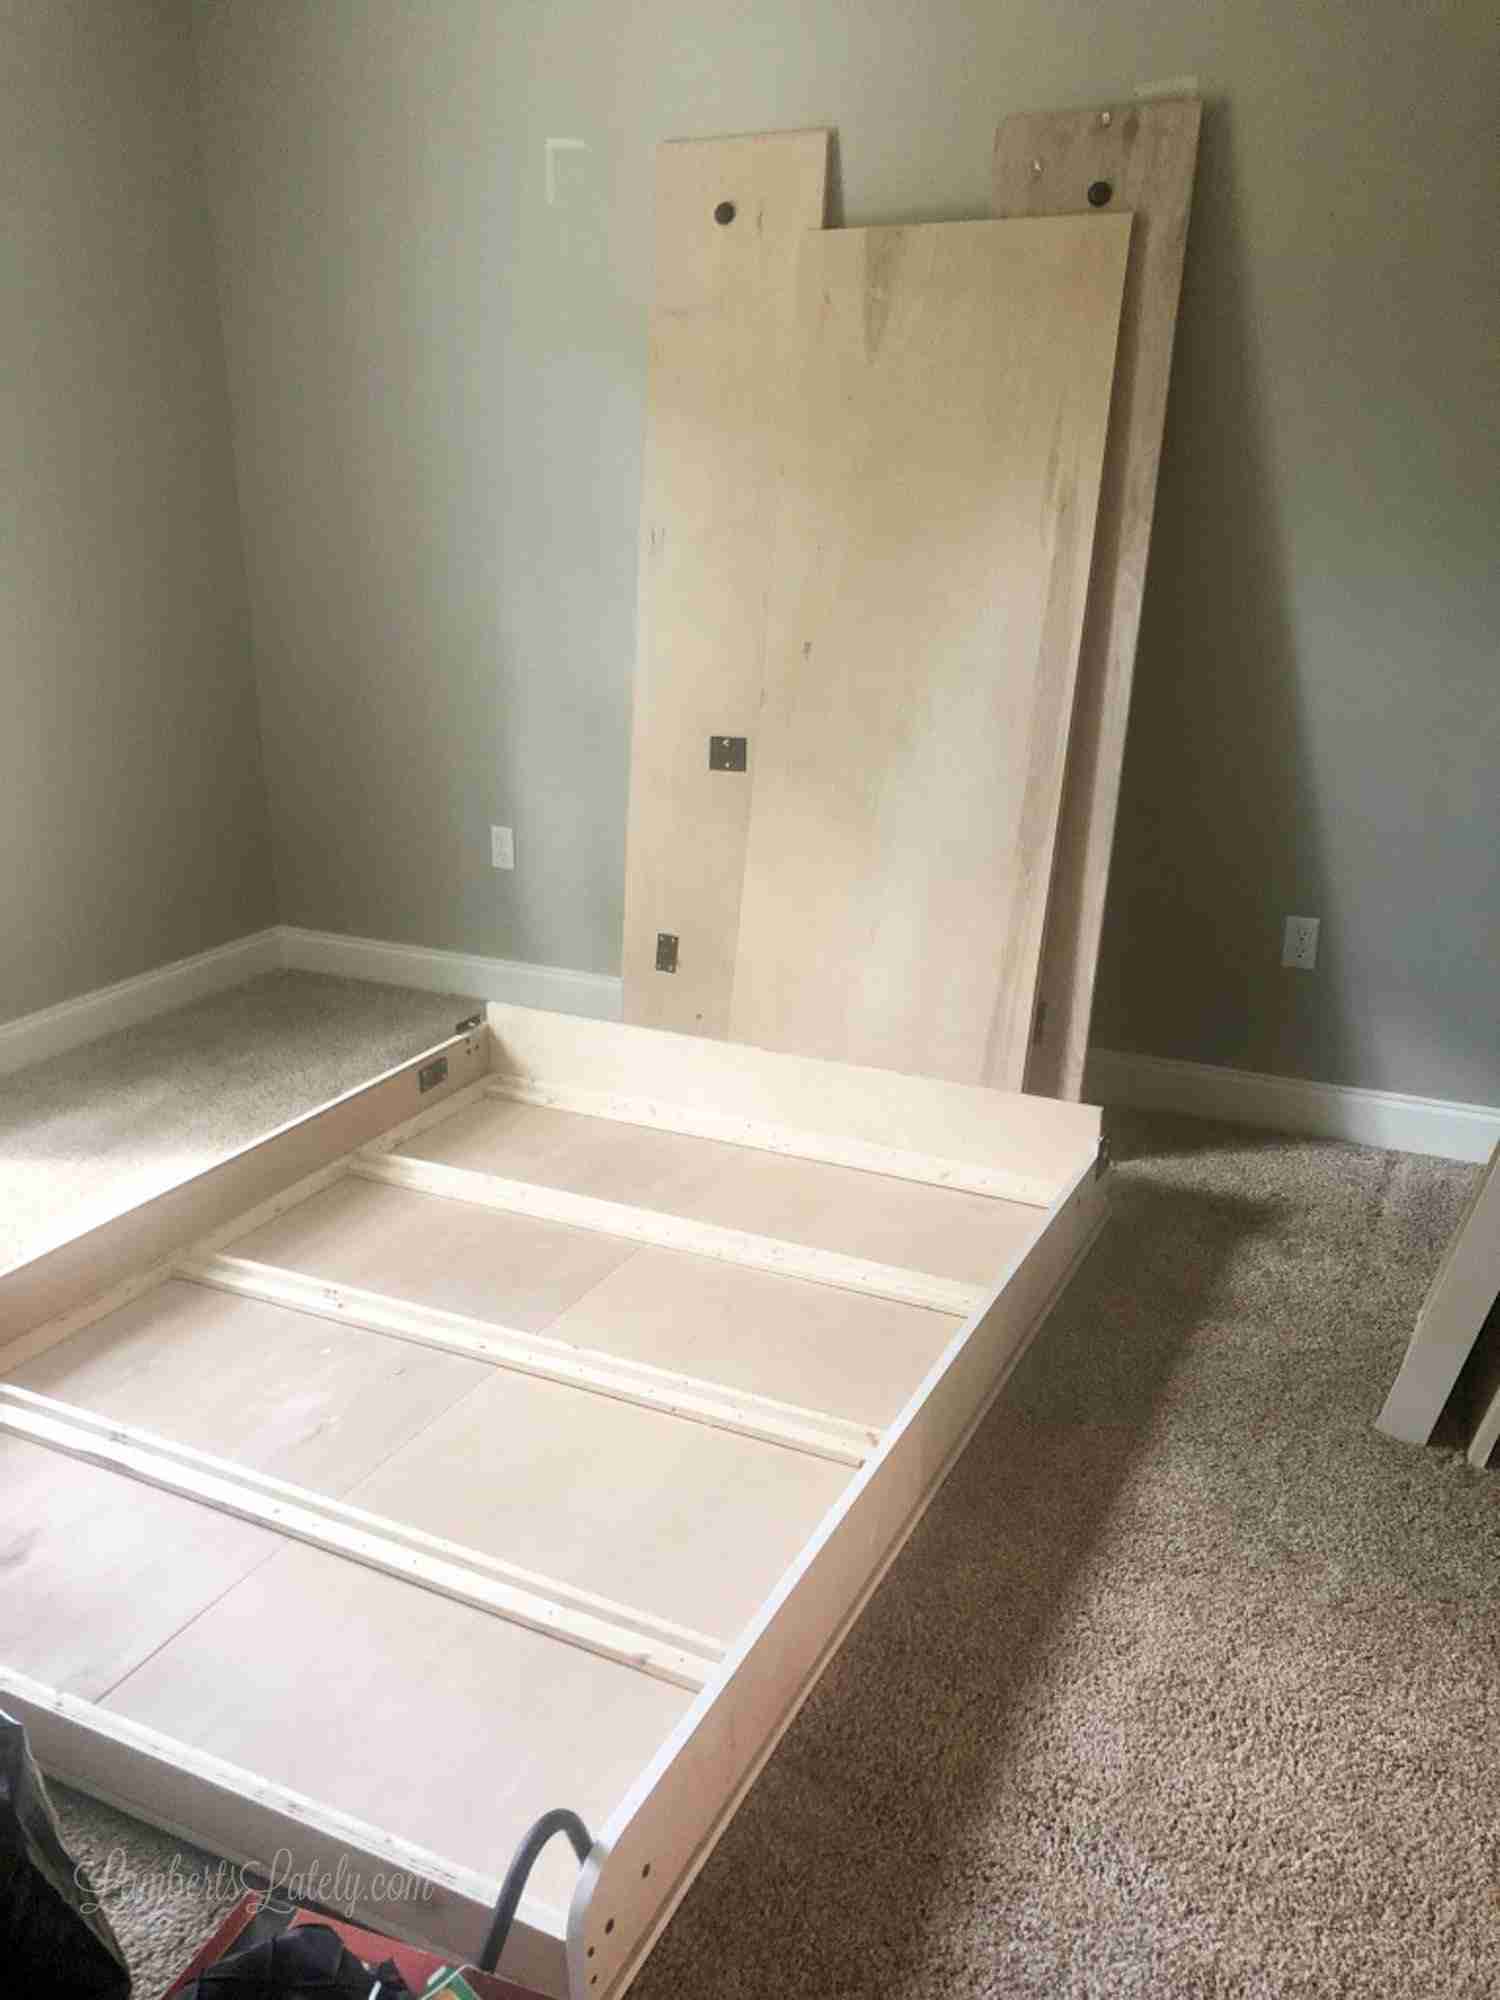 pieces of murphy bed in a bedroom before installing.